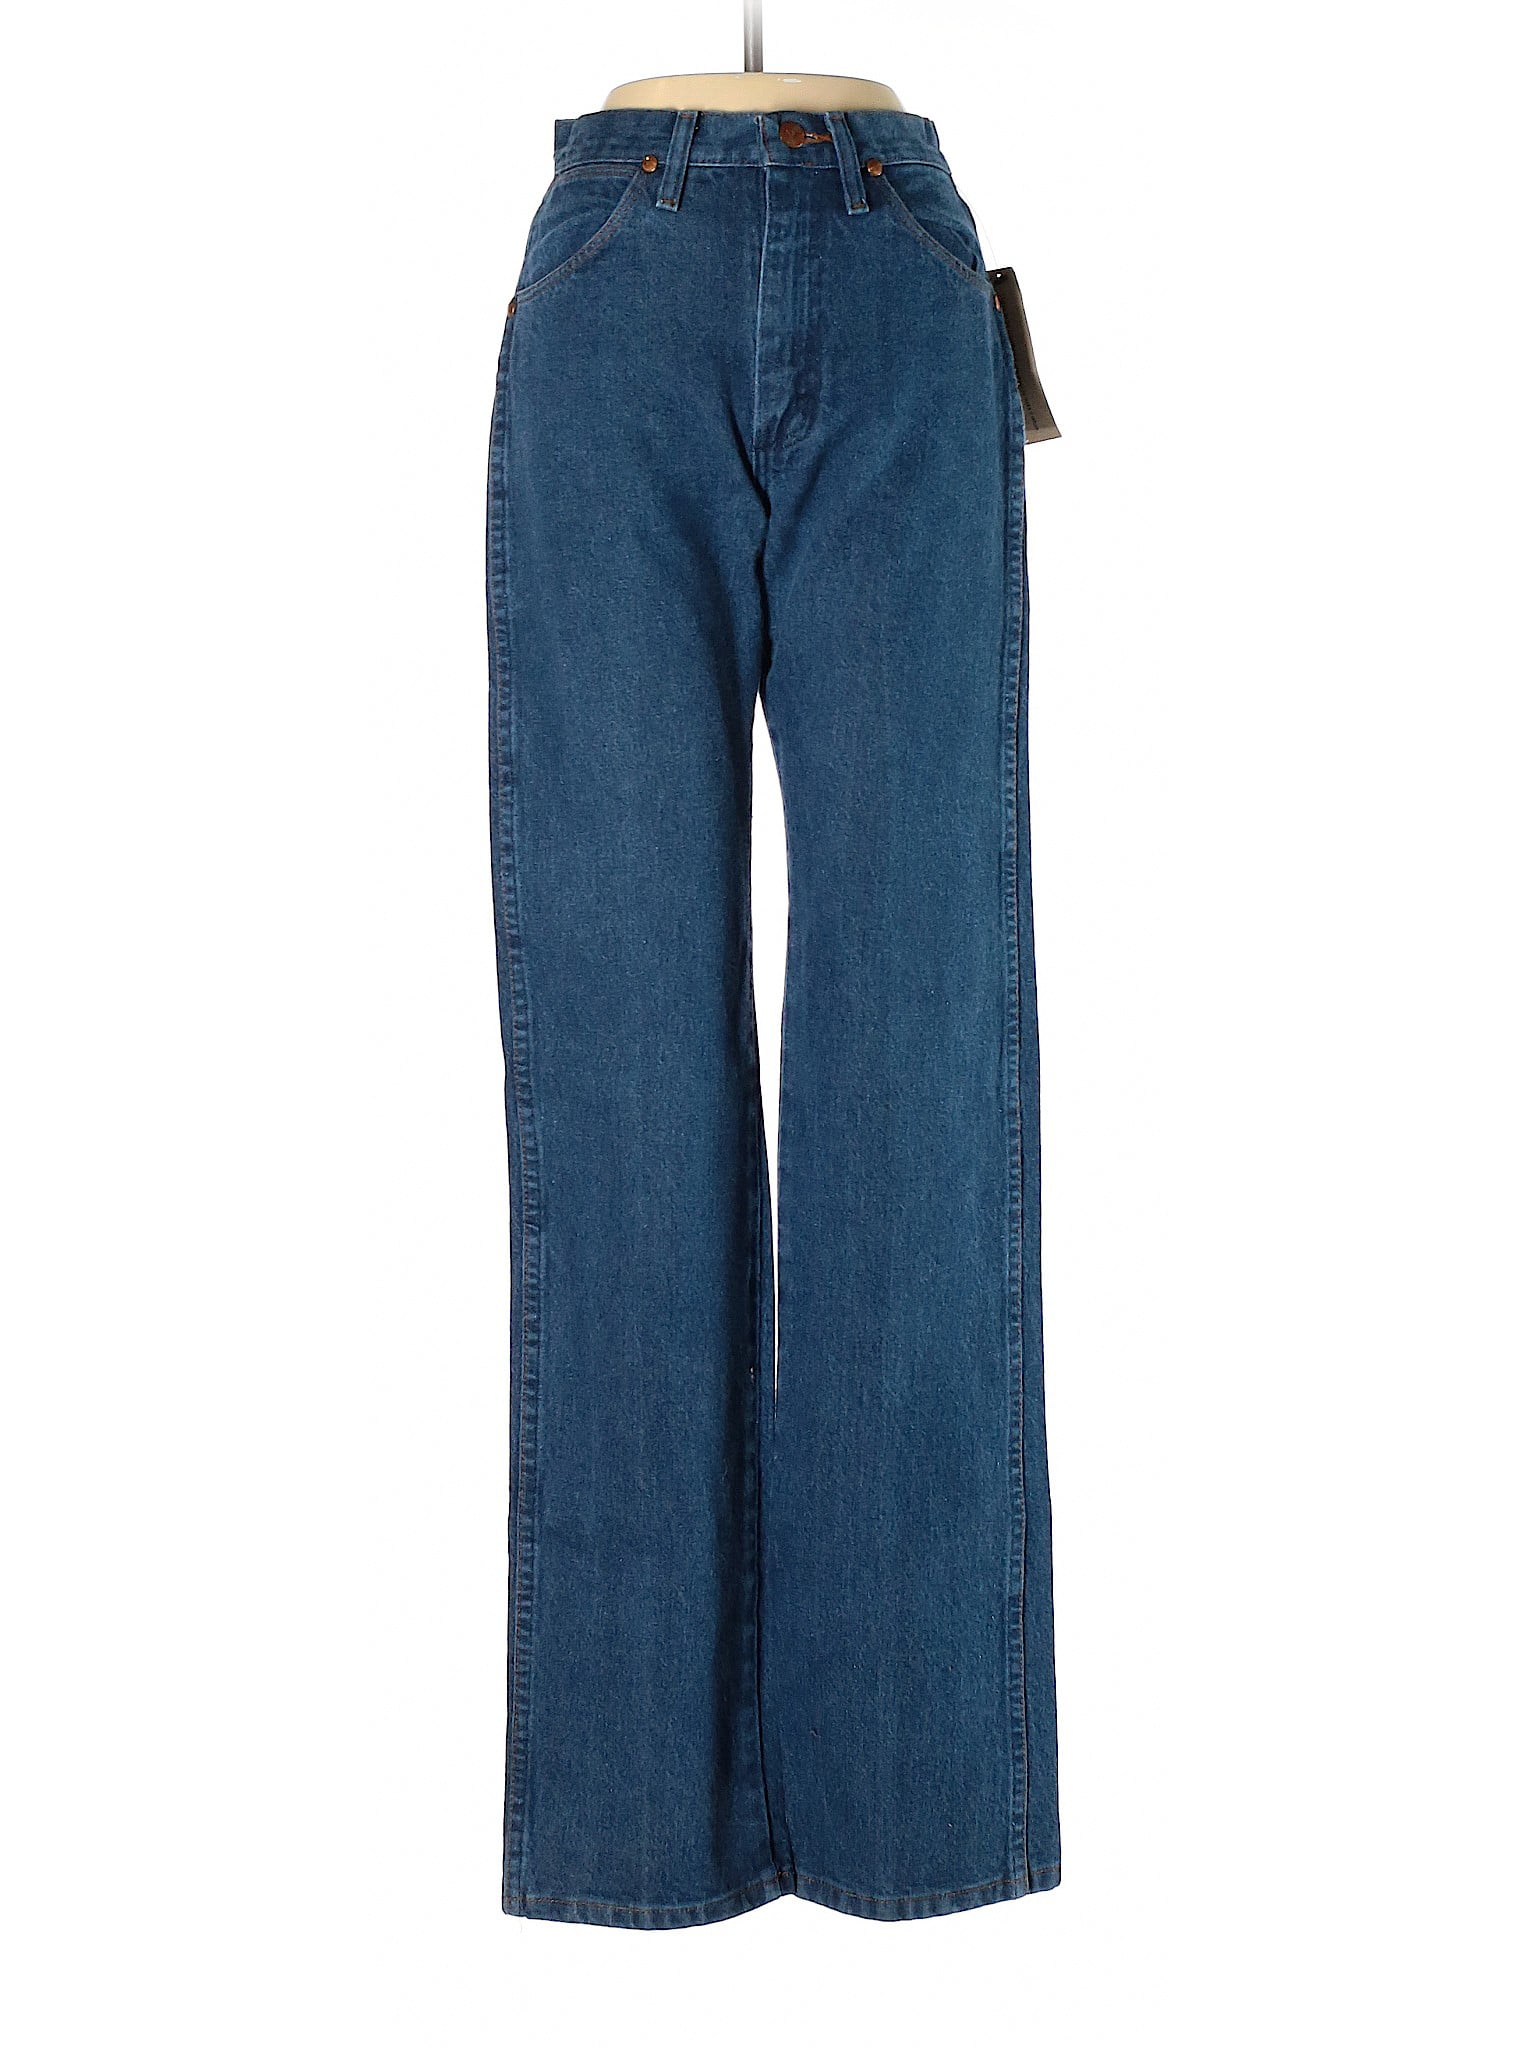 Reformation - Pre-Owned Reformation Women's Size 24W Jeans - Walmart ...